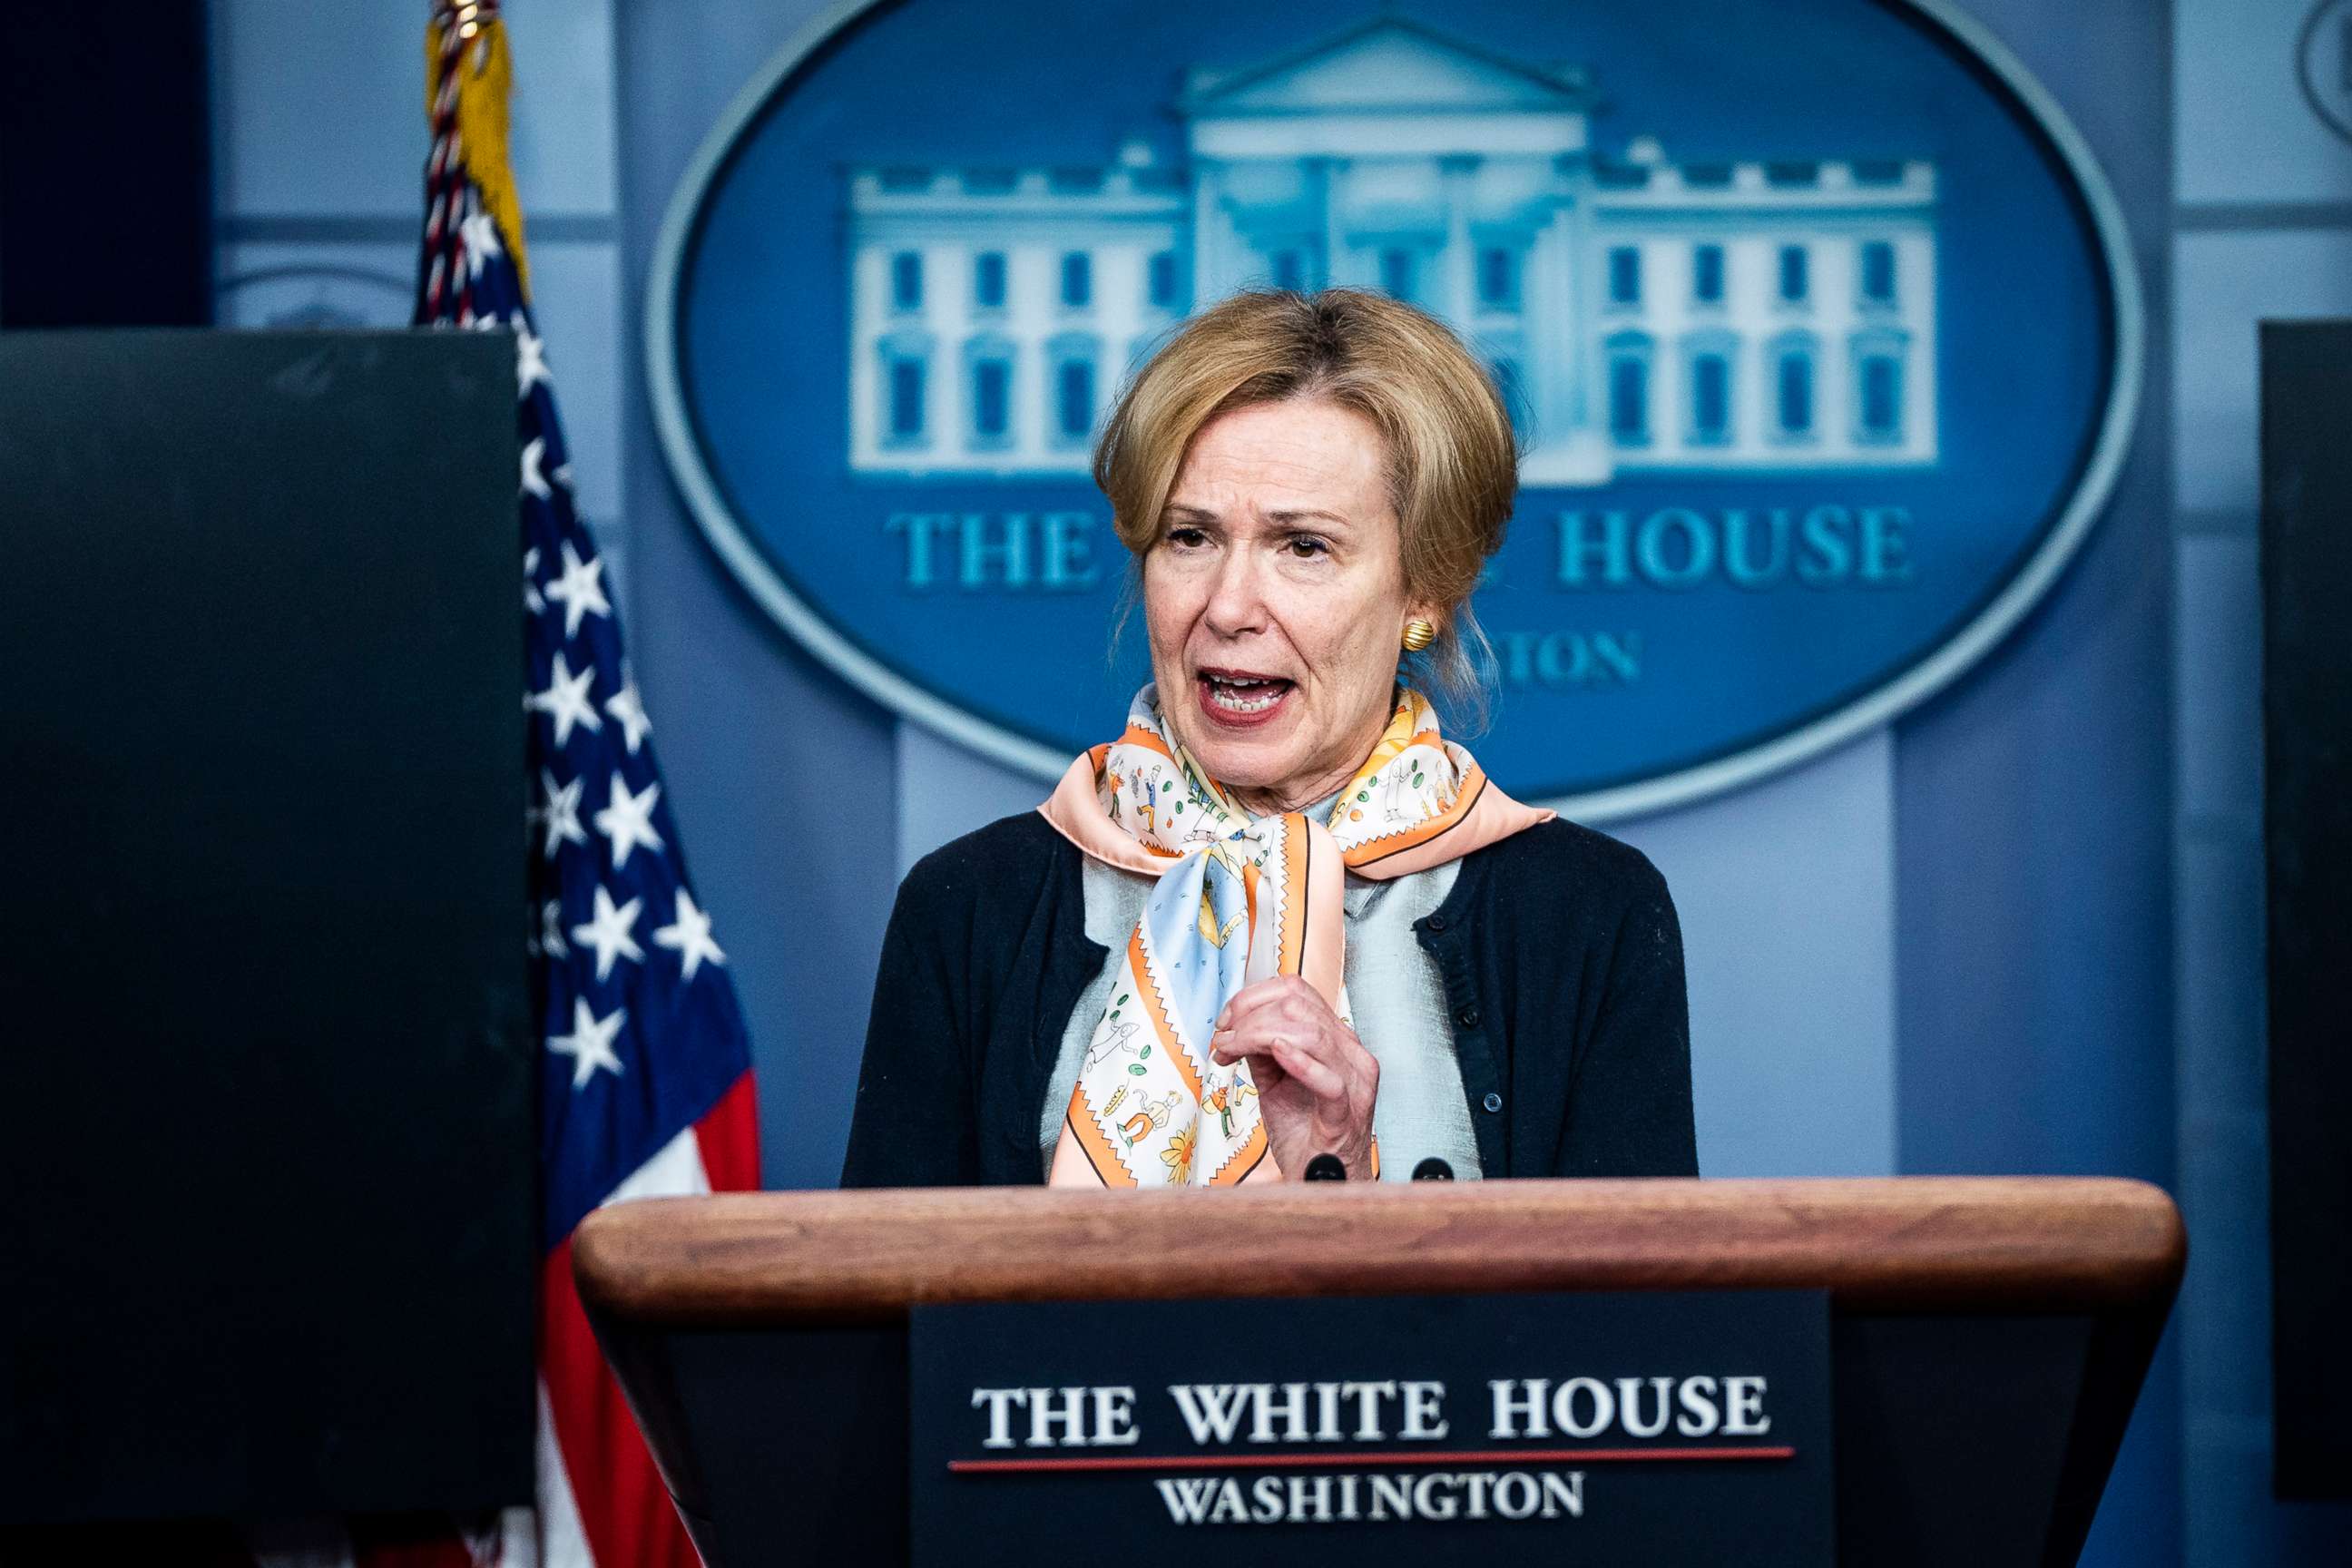 PHOTO: Dr. Deborah Birx, White House coronavirus response coordinator, speaks with President Donald Trump and members of the coronavirus task force during a briefing in the James S. Brady Press Briefing Room at the White House, April 23, 2020.